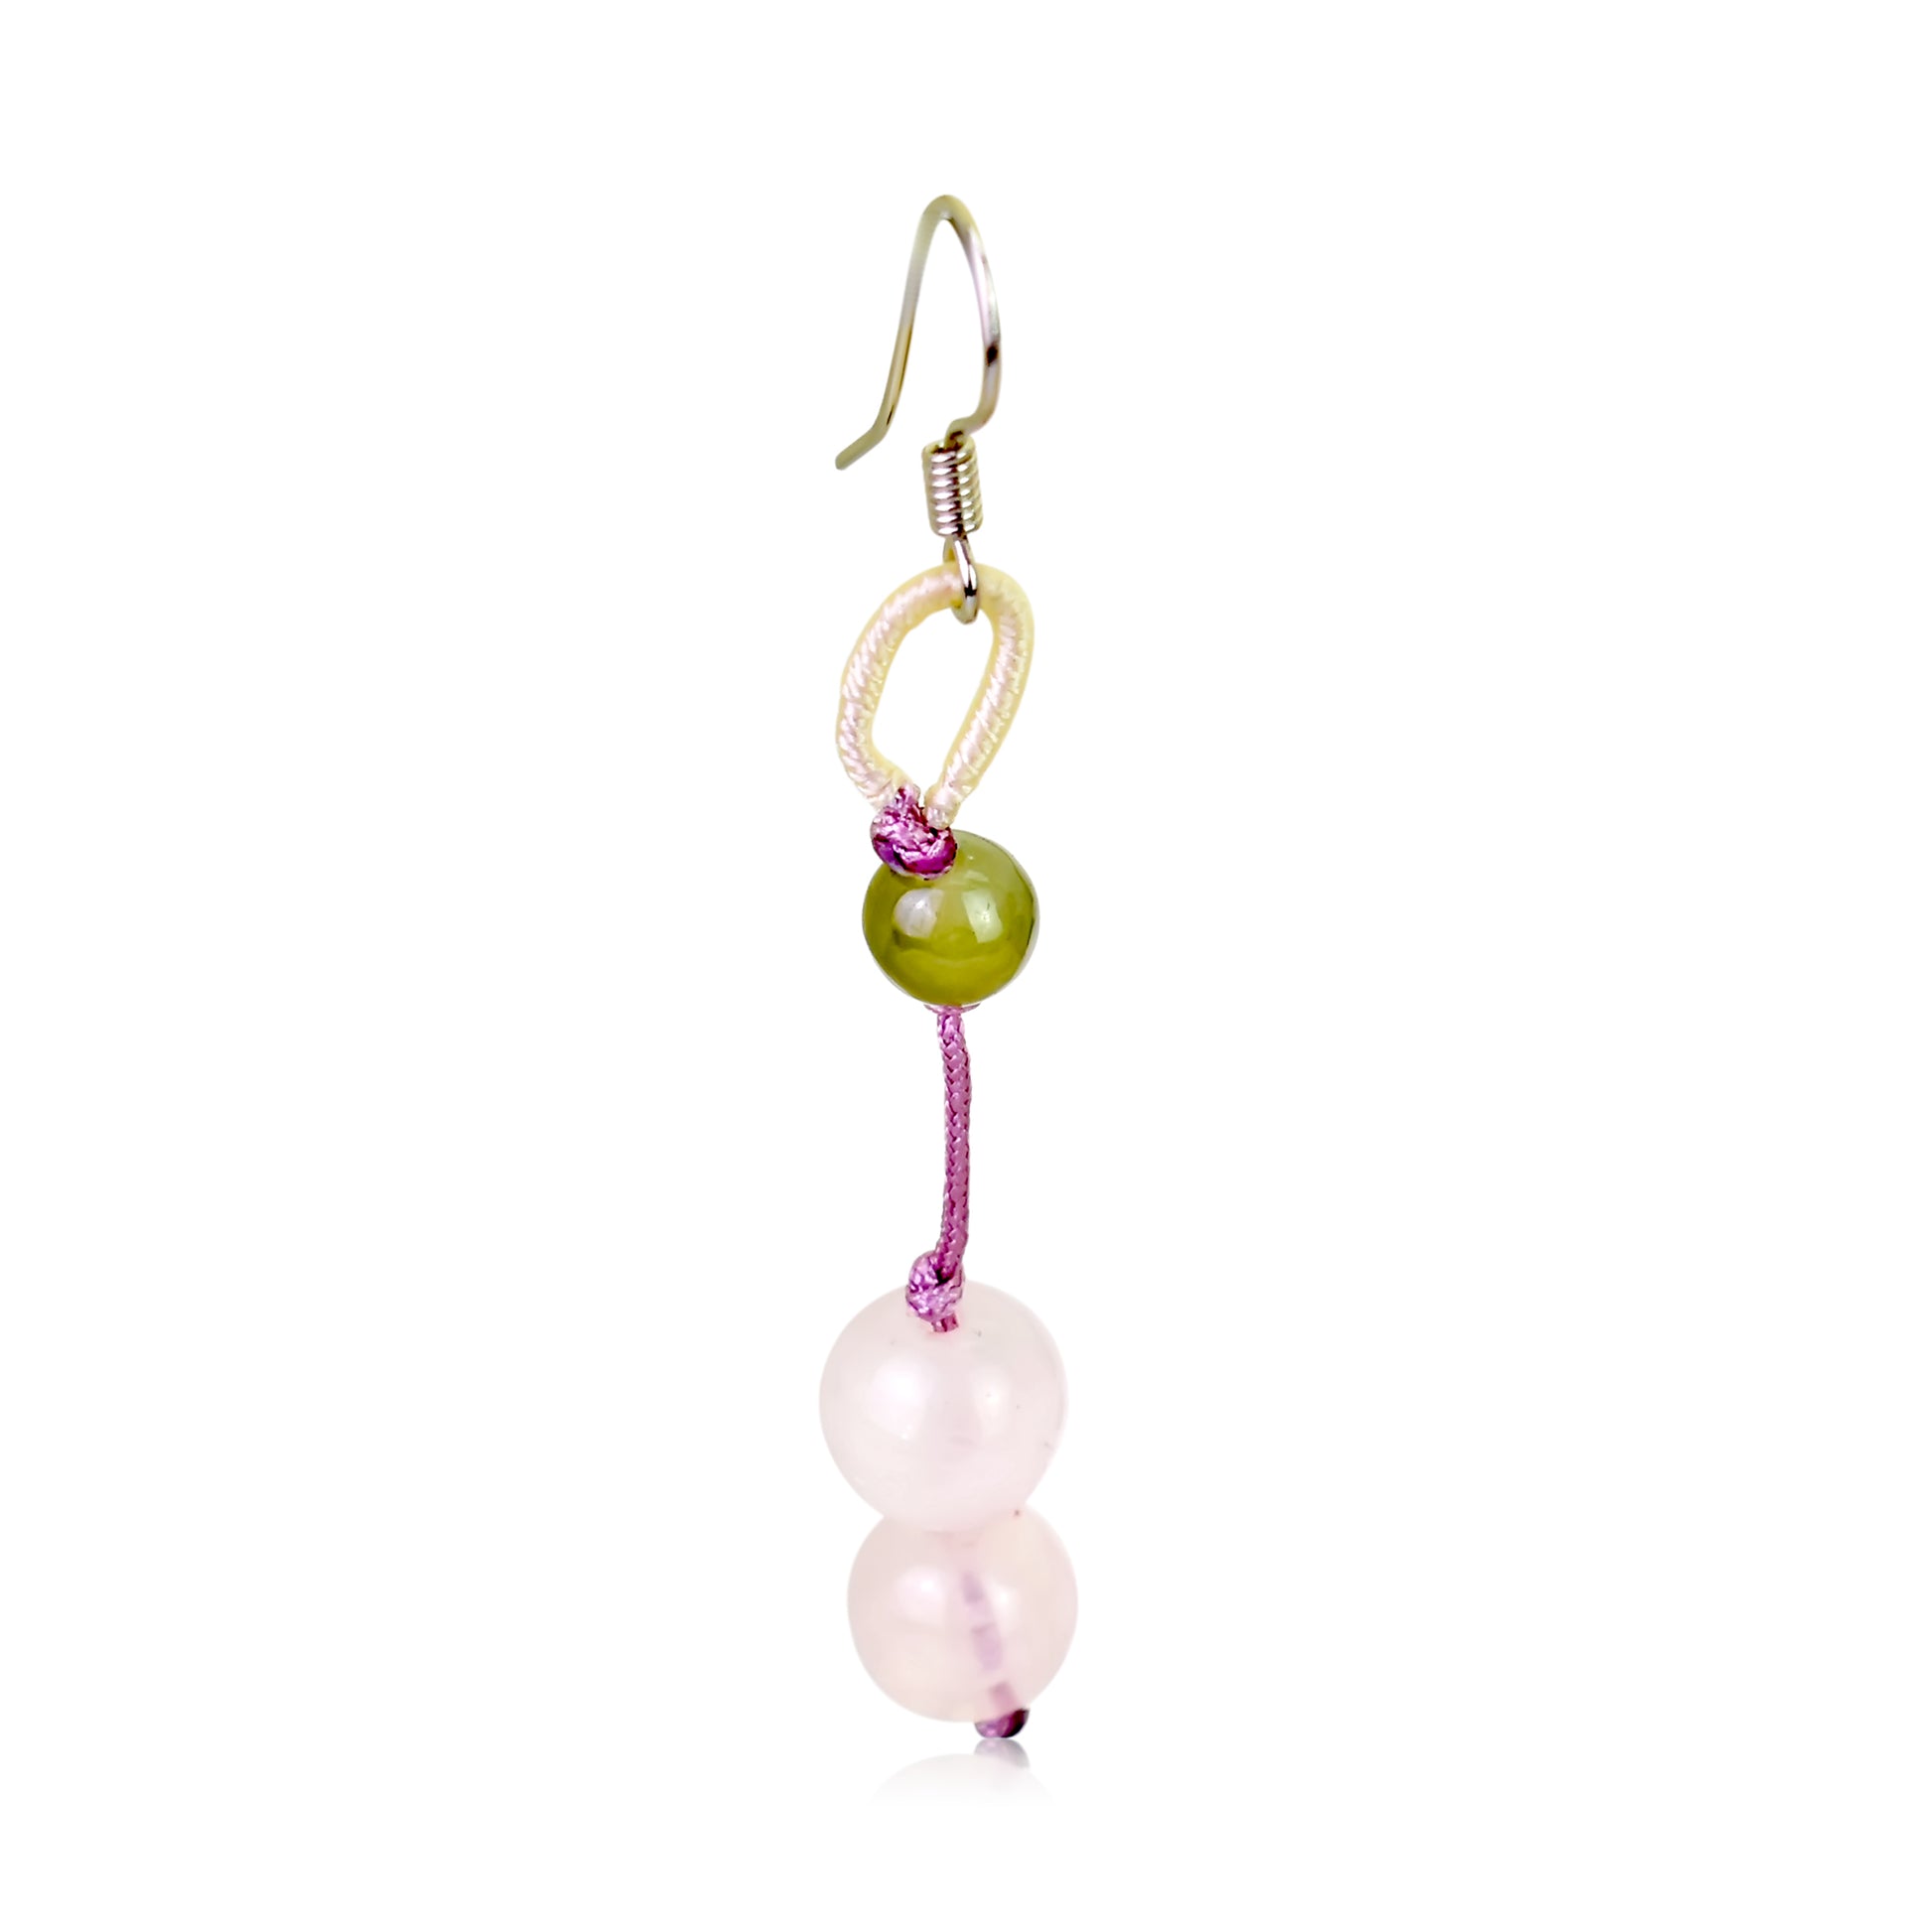 Make a Statement with Alluring Beads Gemstone Earrings made with Lavender Cord